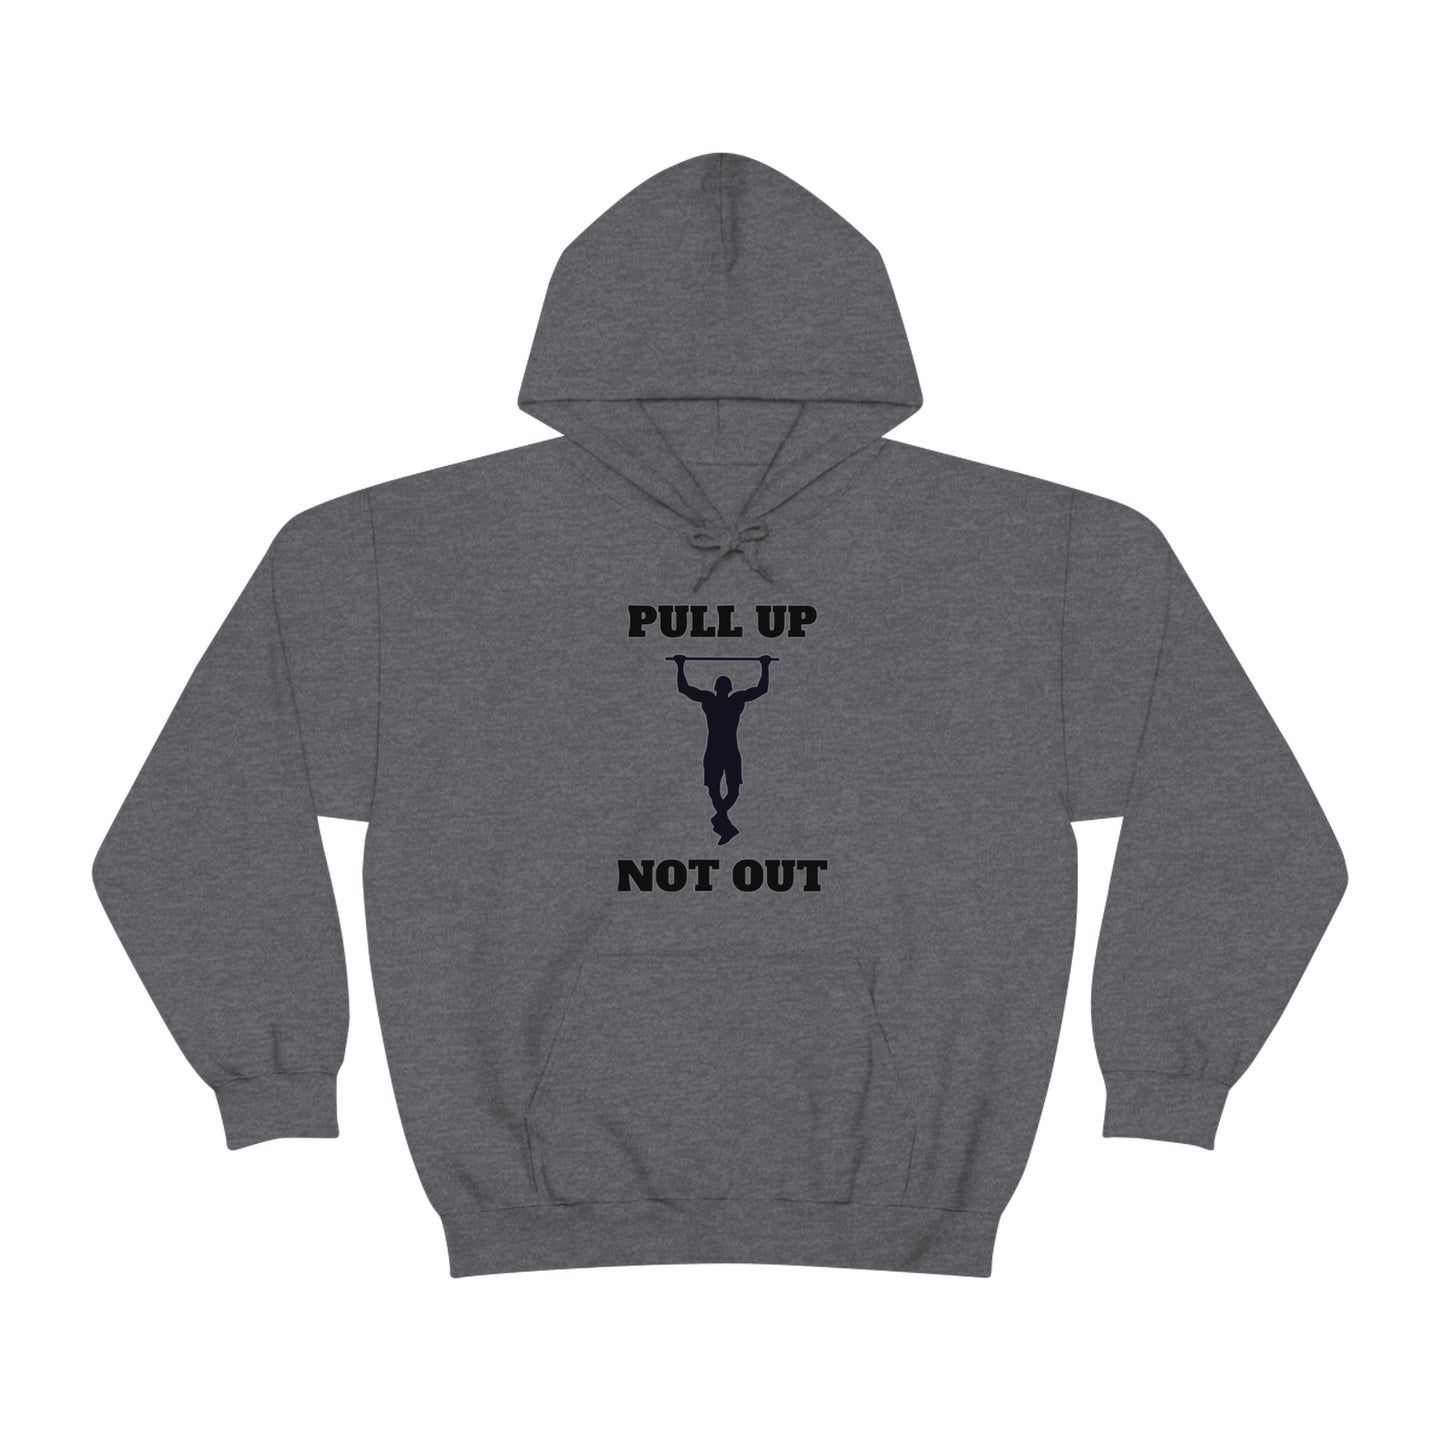 "Pull Up Not Out" Hoodie